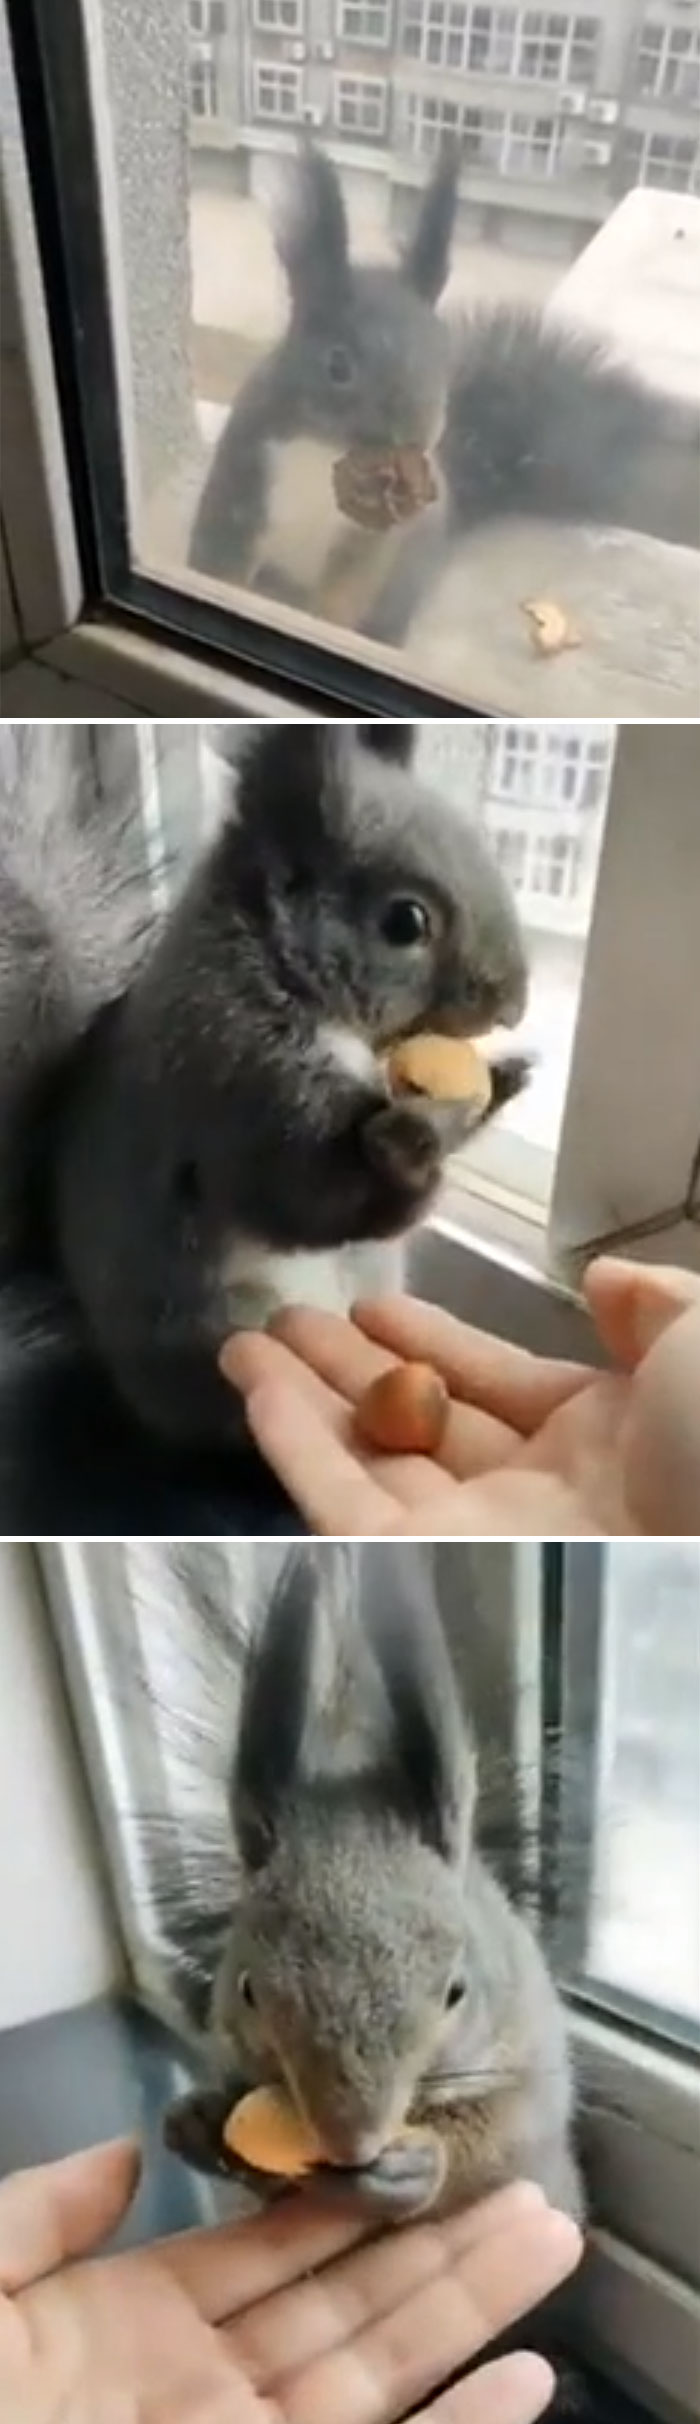 Everyday This Squirrel Trades Dried Leaves For Fresh Nuts At This Woman's Apartment Window